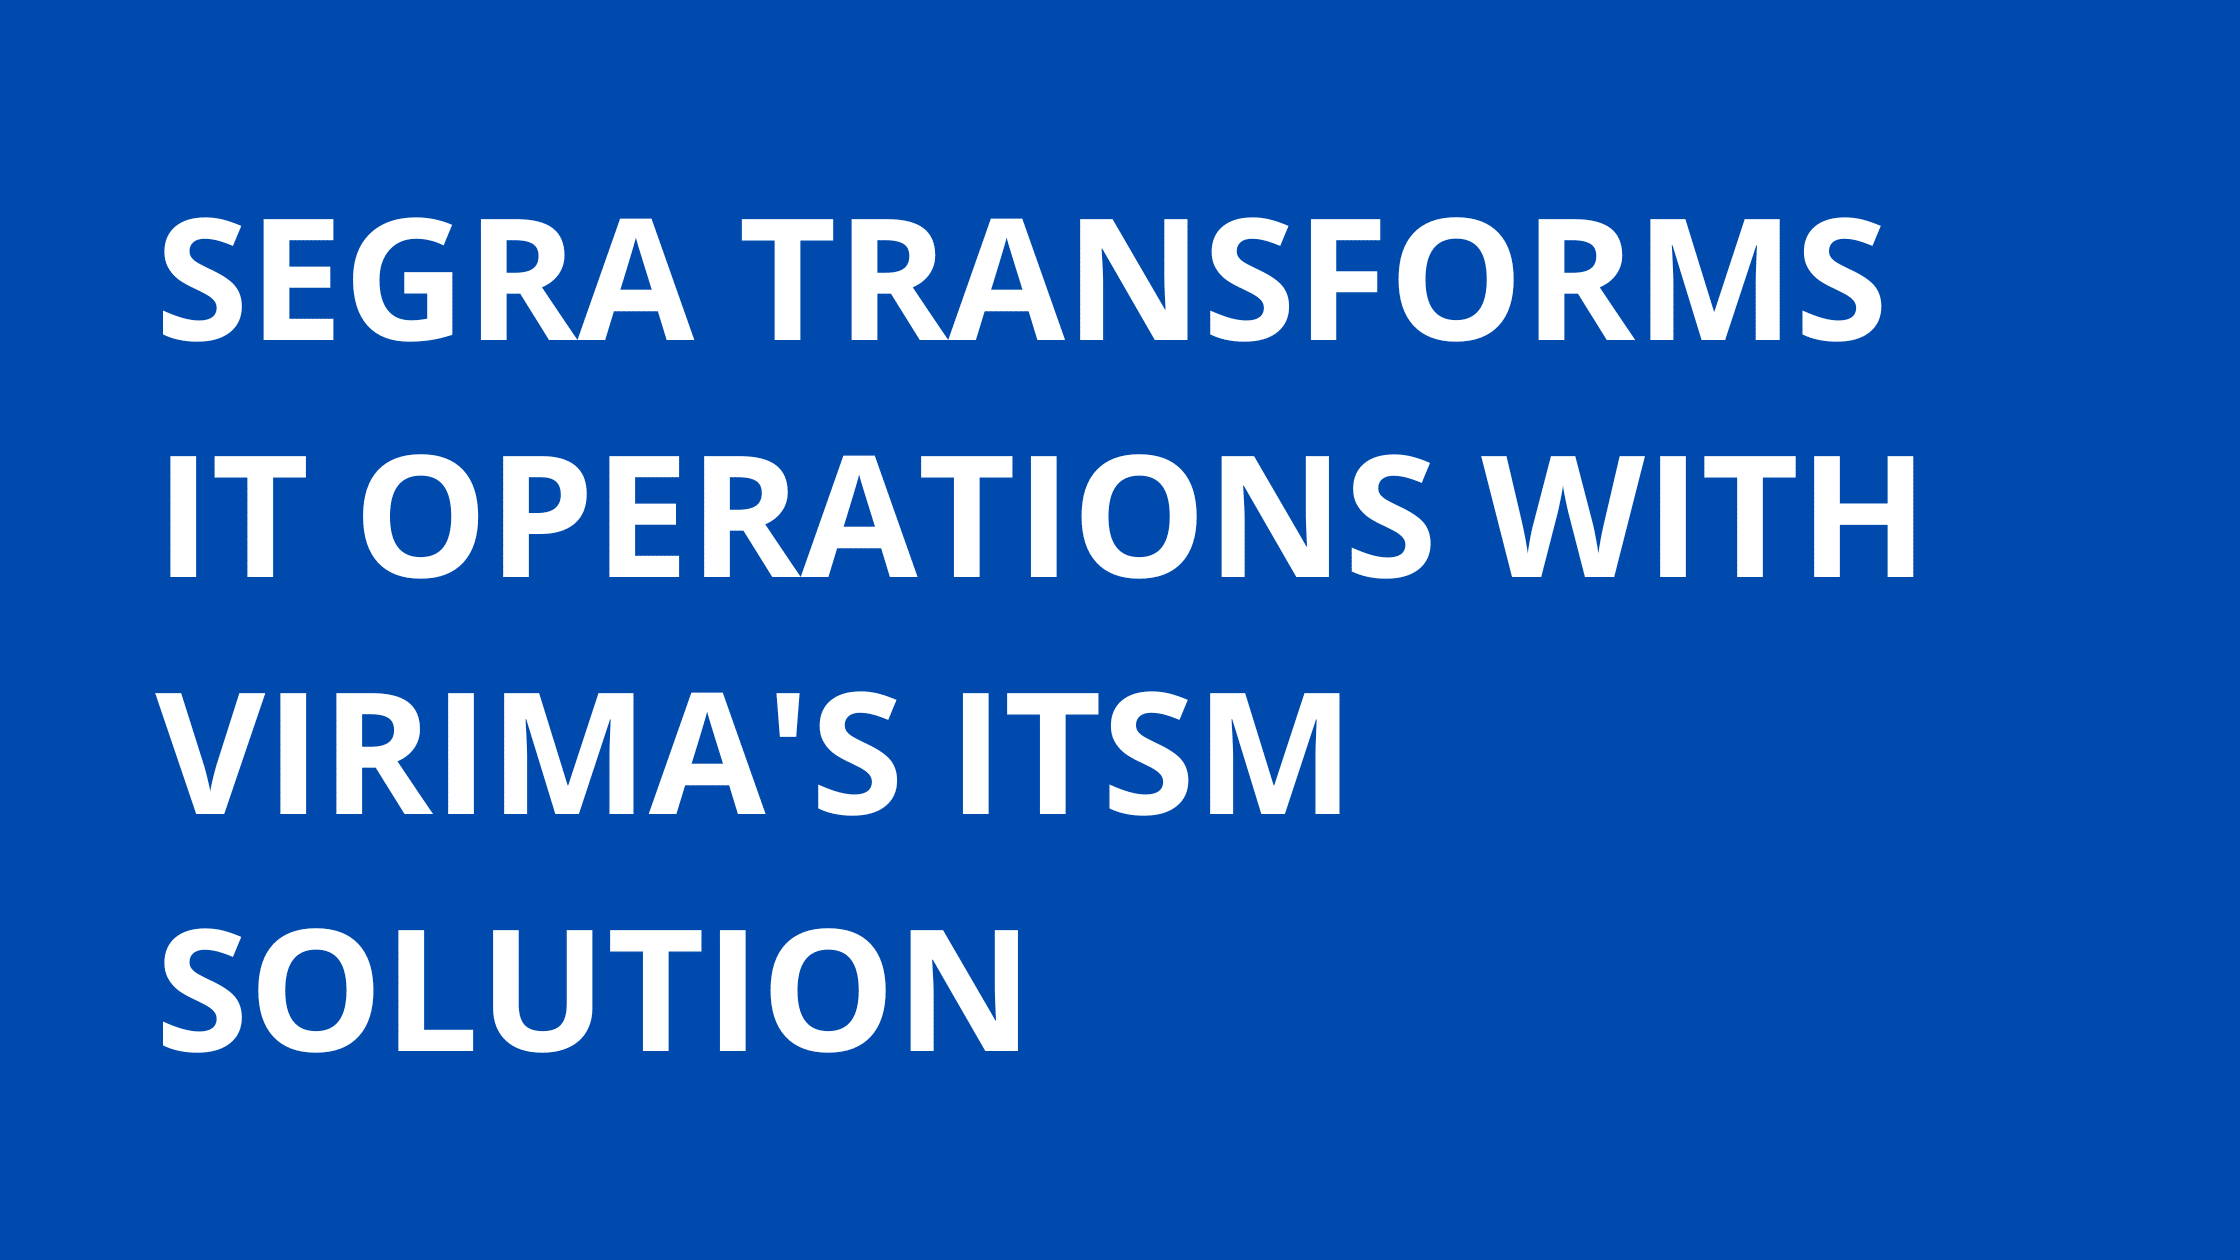 Segra Transforms IT Operations with Virima's ITSM Solution